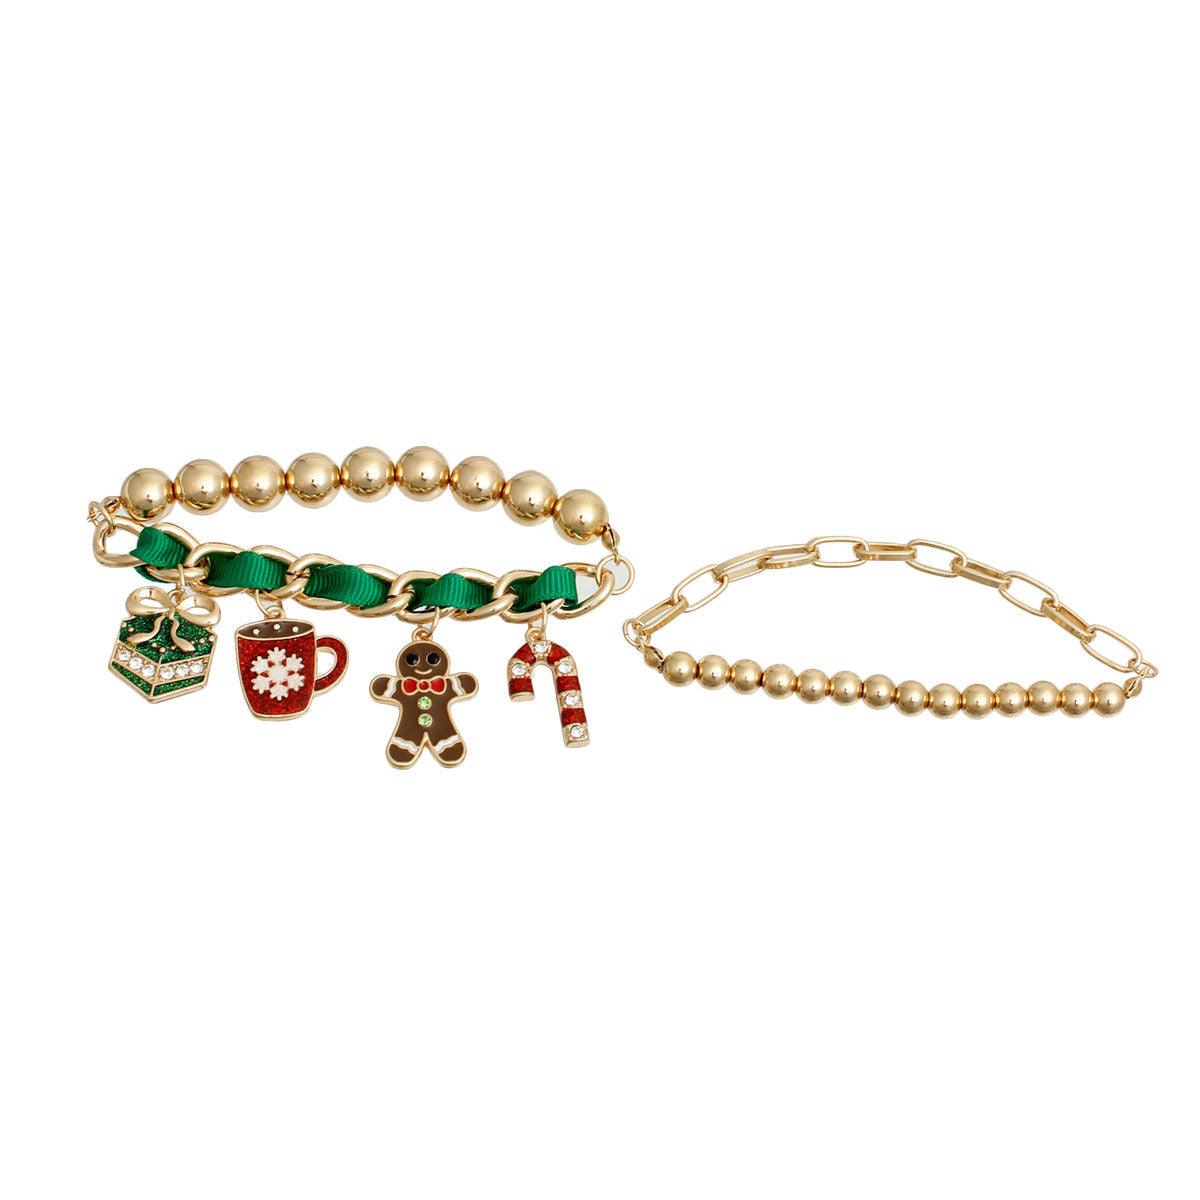 Get Festive with Our Gingerbread Plus Charms Bracelet Set